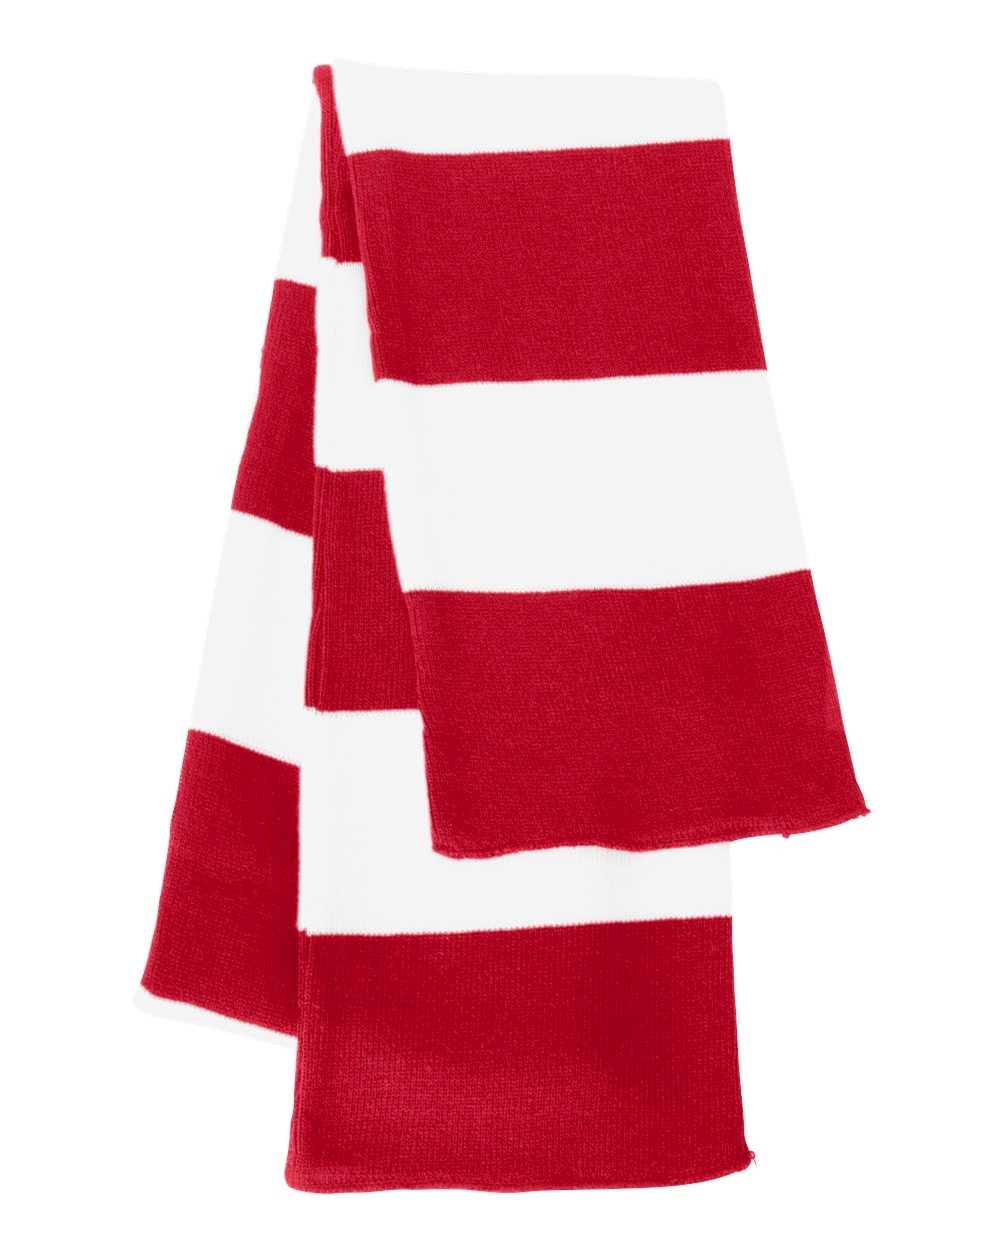 Rugby Striped Knit Scarf Embroidery Blanks - RED/WHITE